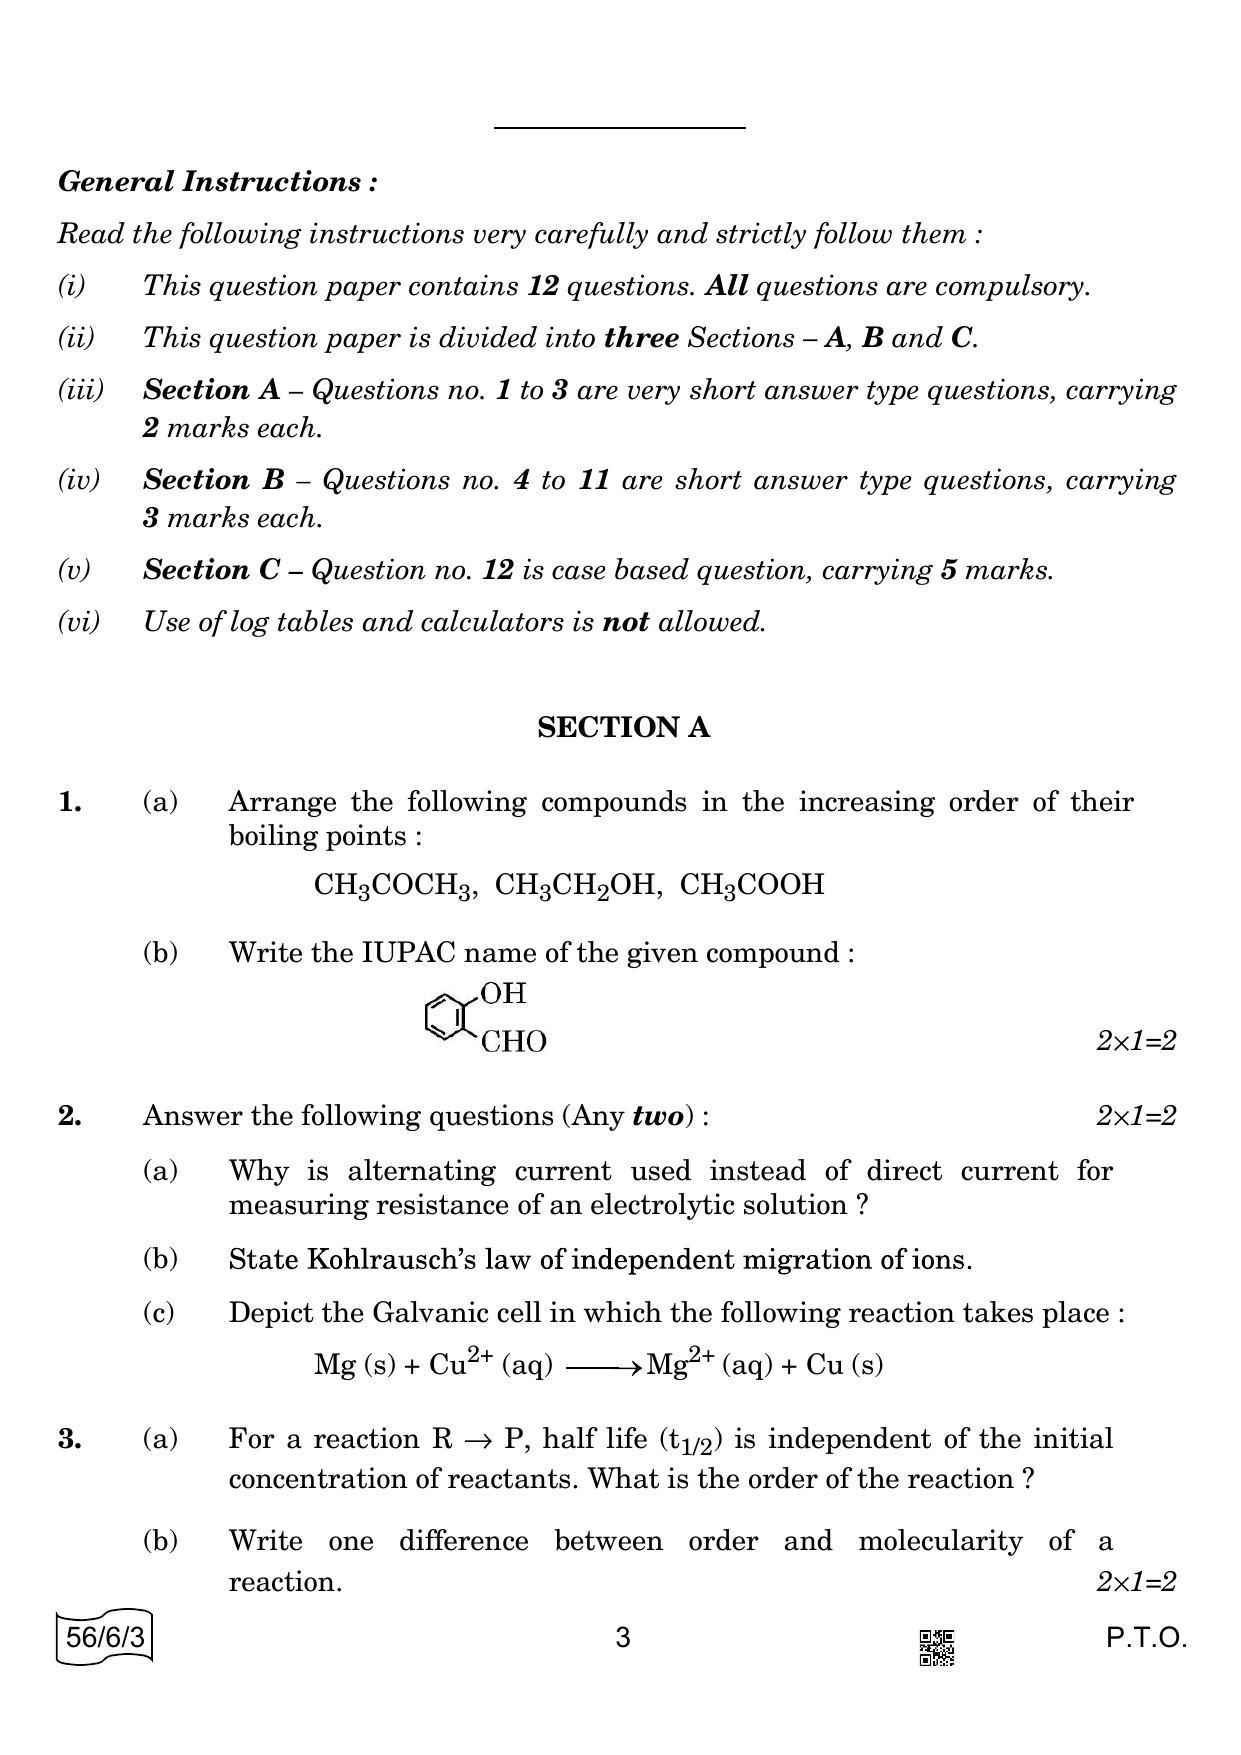 CBSE Class 12 56-6-3 CHEMISTRY 2022 Compartment Question Paper - Page 3